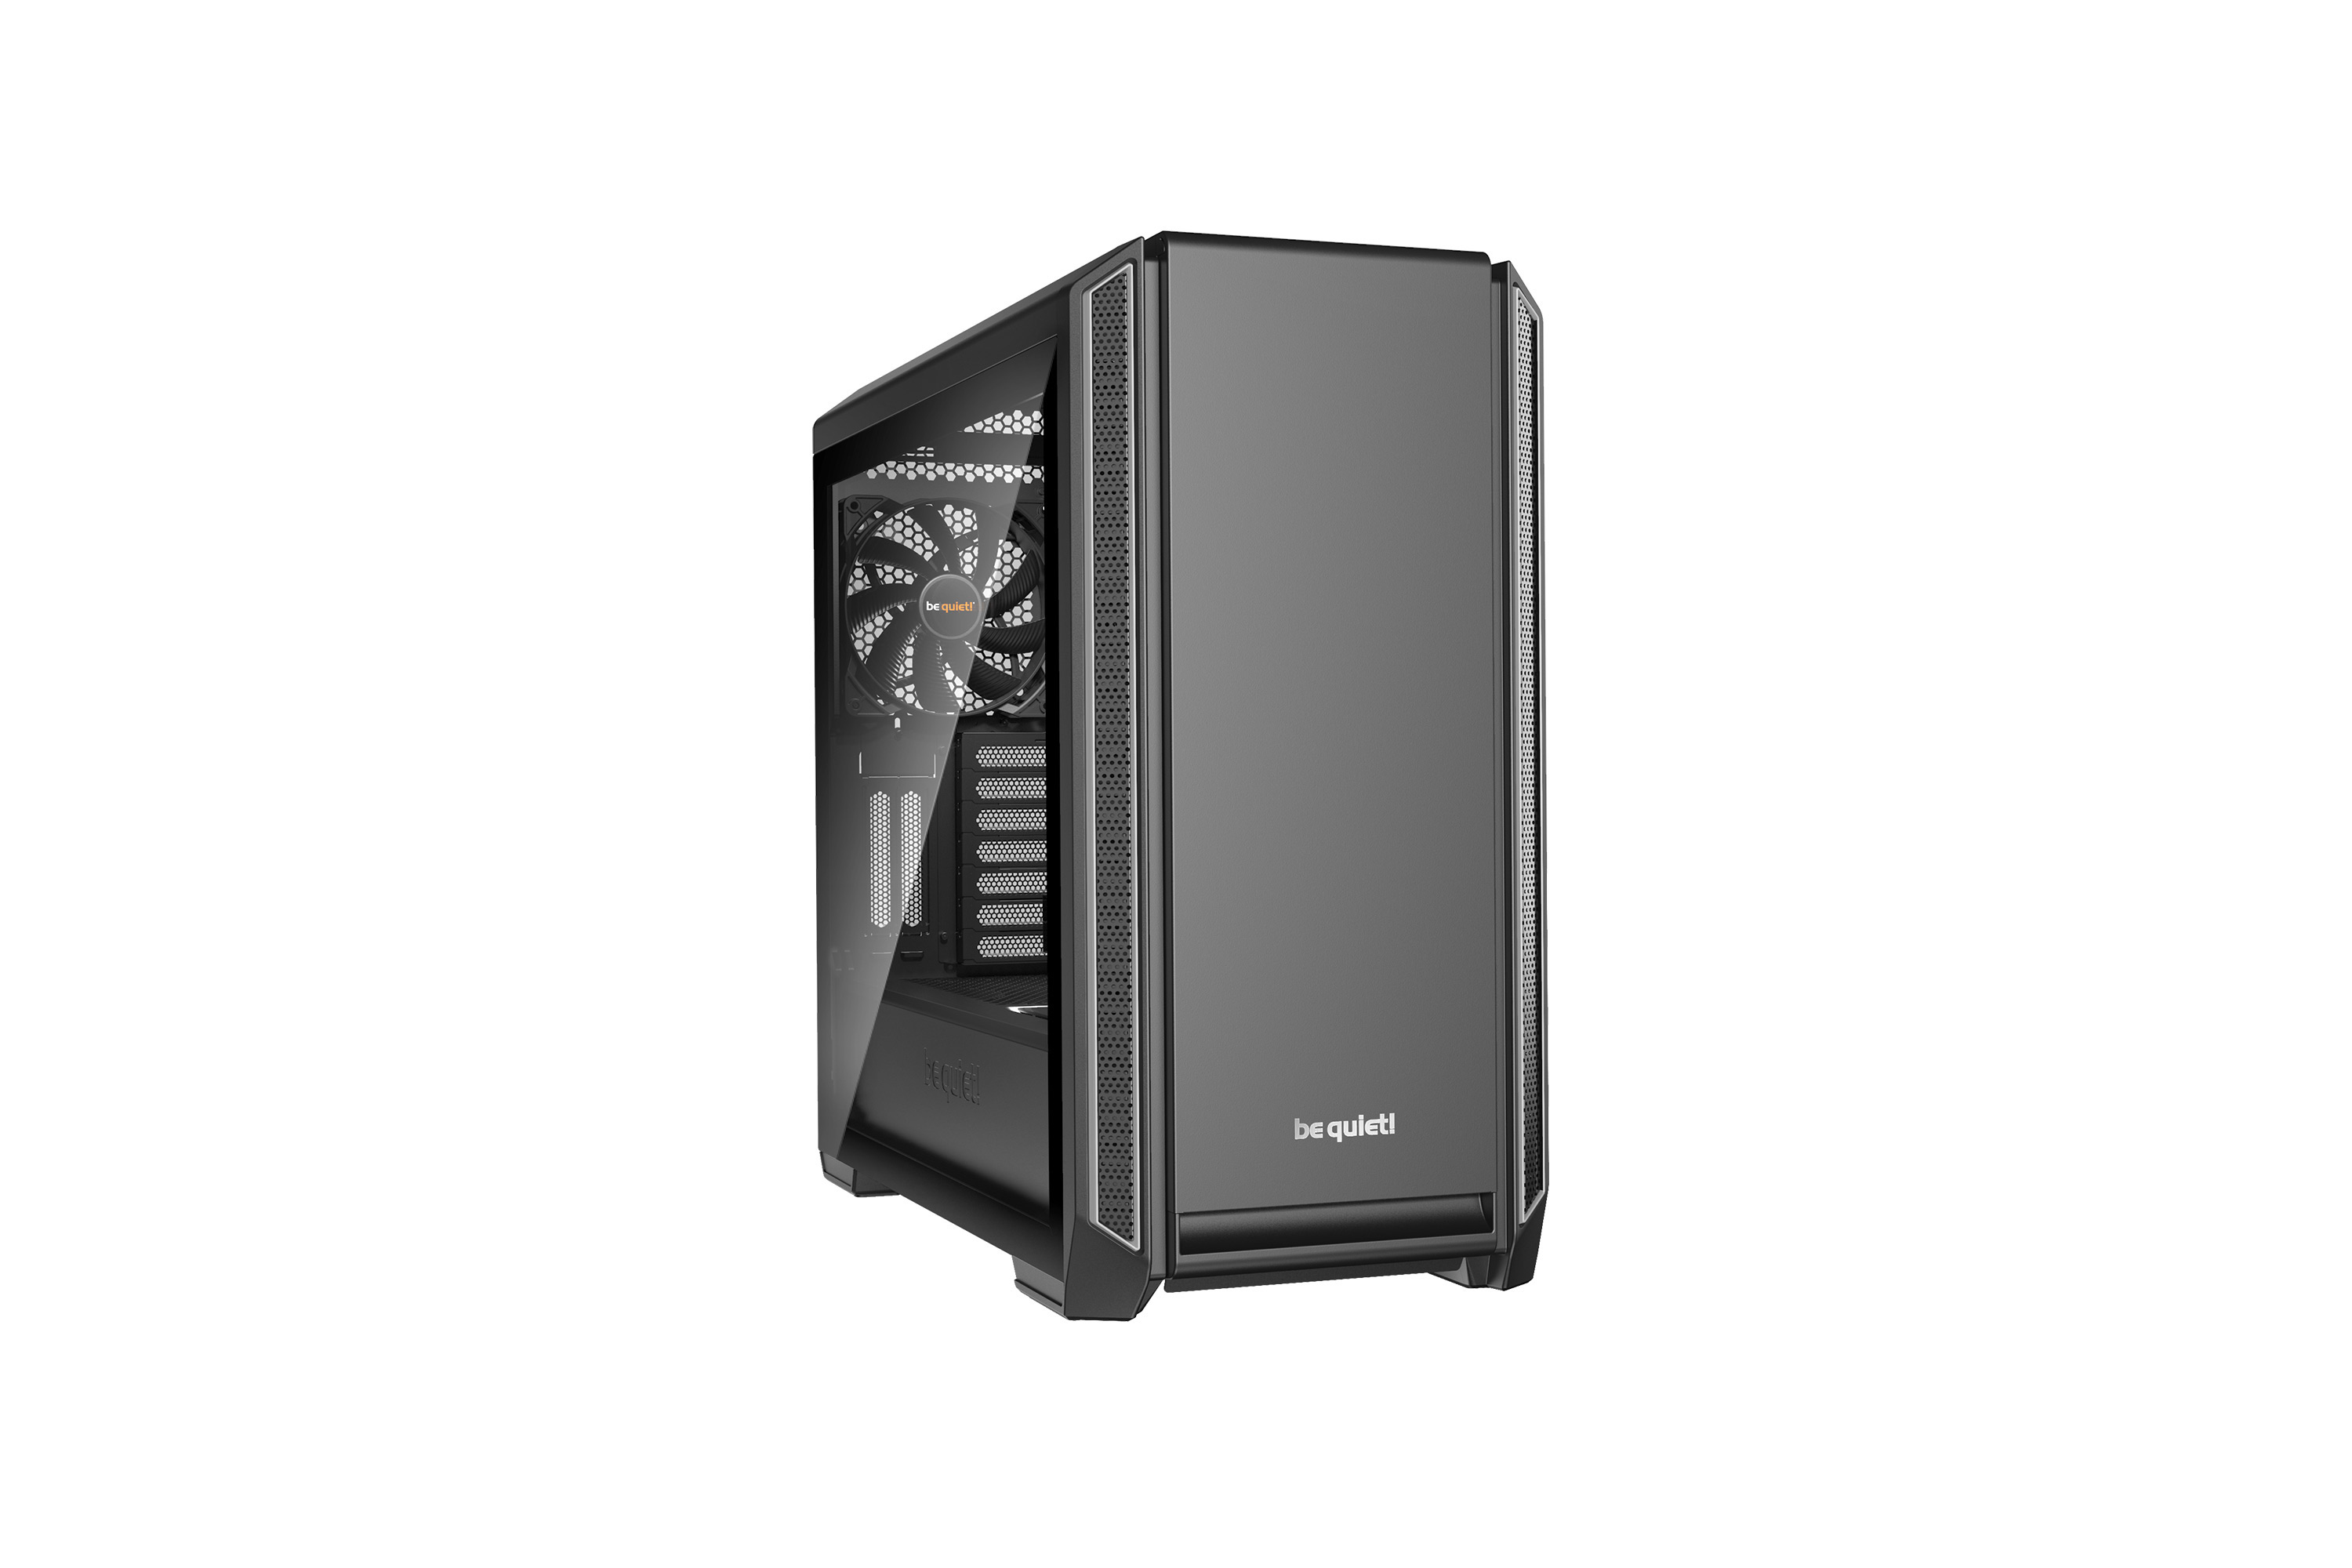 be quiet! Silent Base 601 Window Silver, 532 x 240 x 514, IO-panel 2x USB 3.0, 1x USB 2.0, HD Audio, 3 (7) x 3,5, 6 (14) x 2,5, inc 2x 140 mm Pure Wings 2, dual air channel cooling, Tinted and Tempered Glass side panel